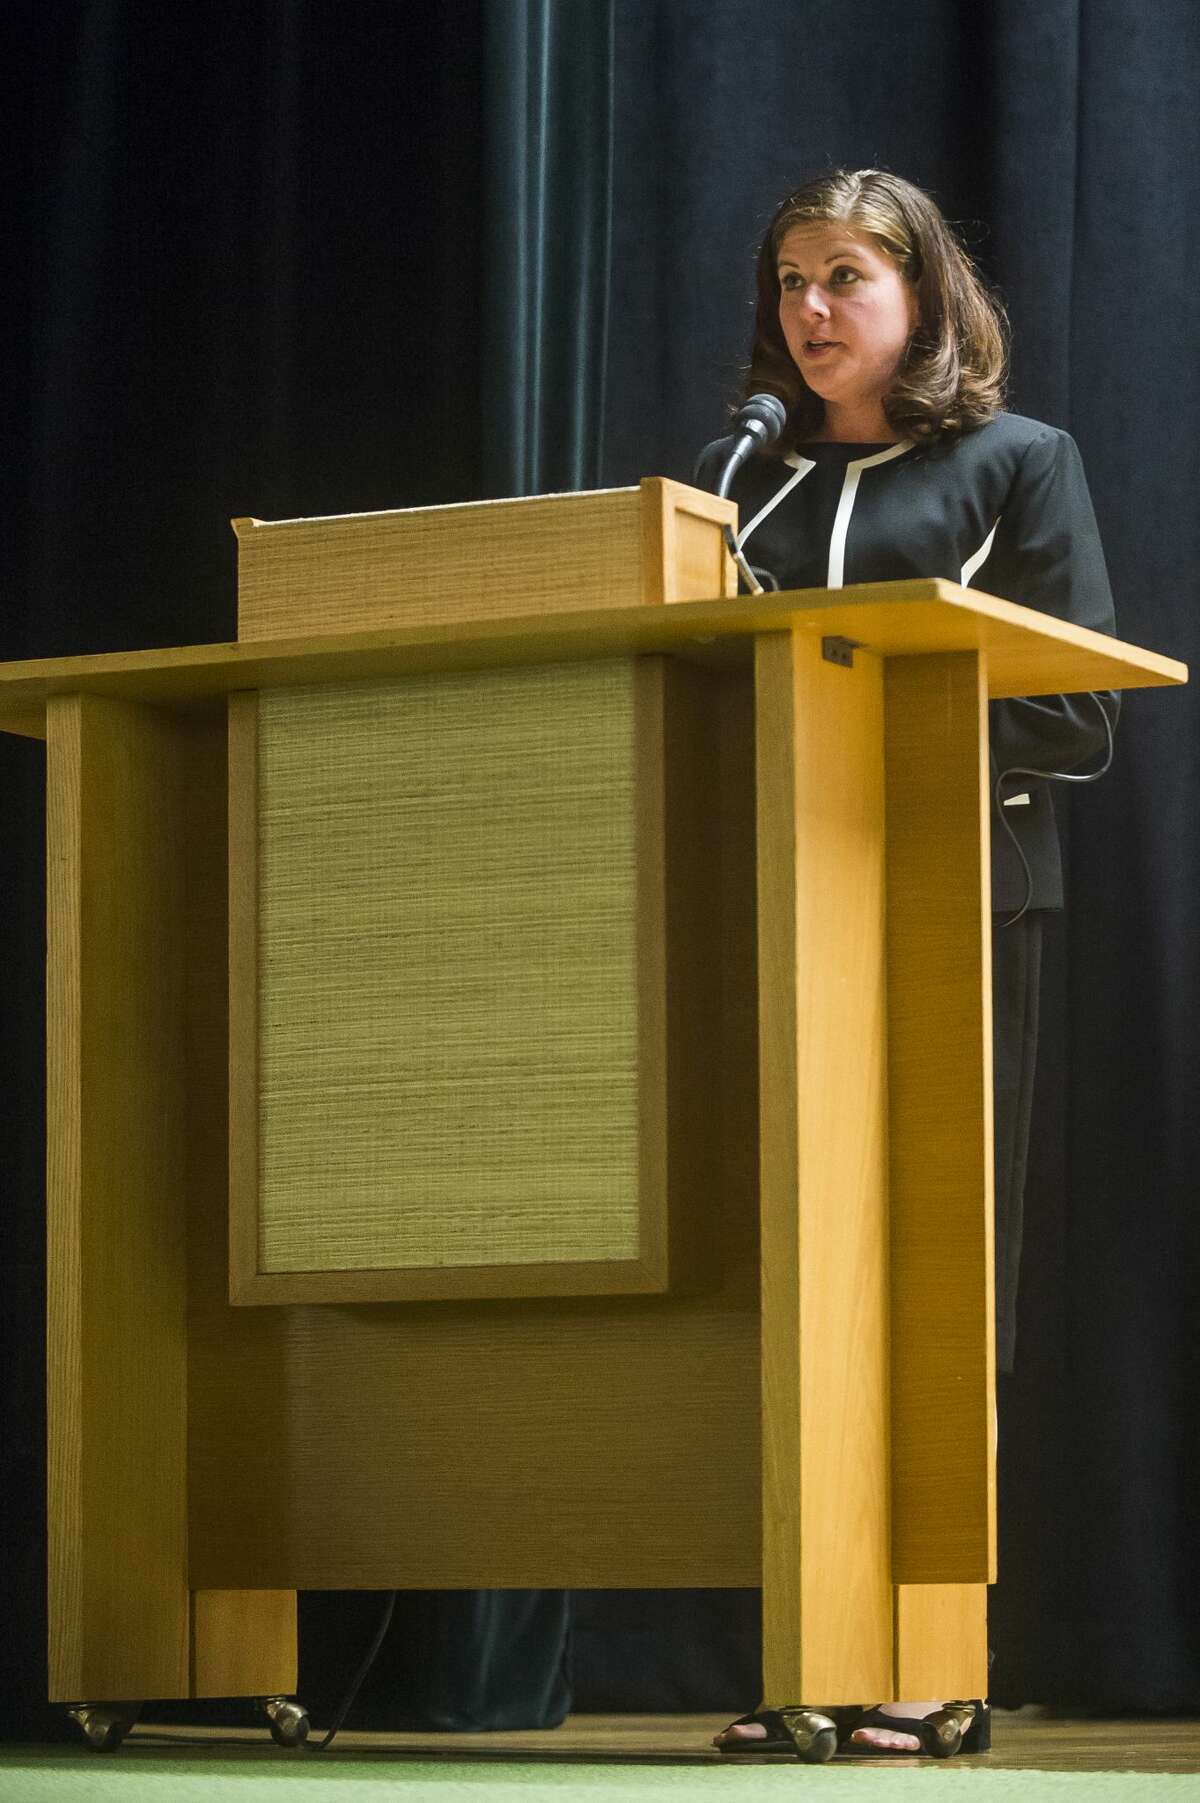 Midland Daily News Editor Kate Hessling addresses a crowd before Michigan Attorney General Dana Nessel takes the stage to speak about the Freedom of Information and Open Meetings acts during a public forum hosted by the Michigan Press Association and the Midland Daily News Thursday, Oct. 17, 2019 at Grace A. Dow Memorial Library. (Katy Kildee/kkildee@mdn.net)